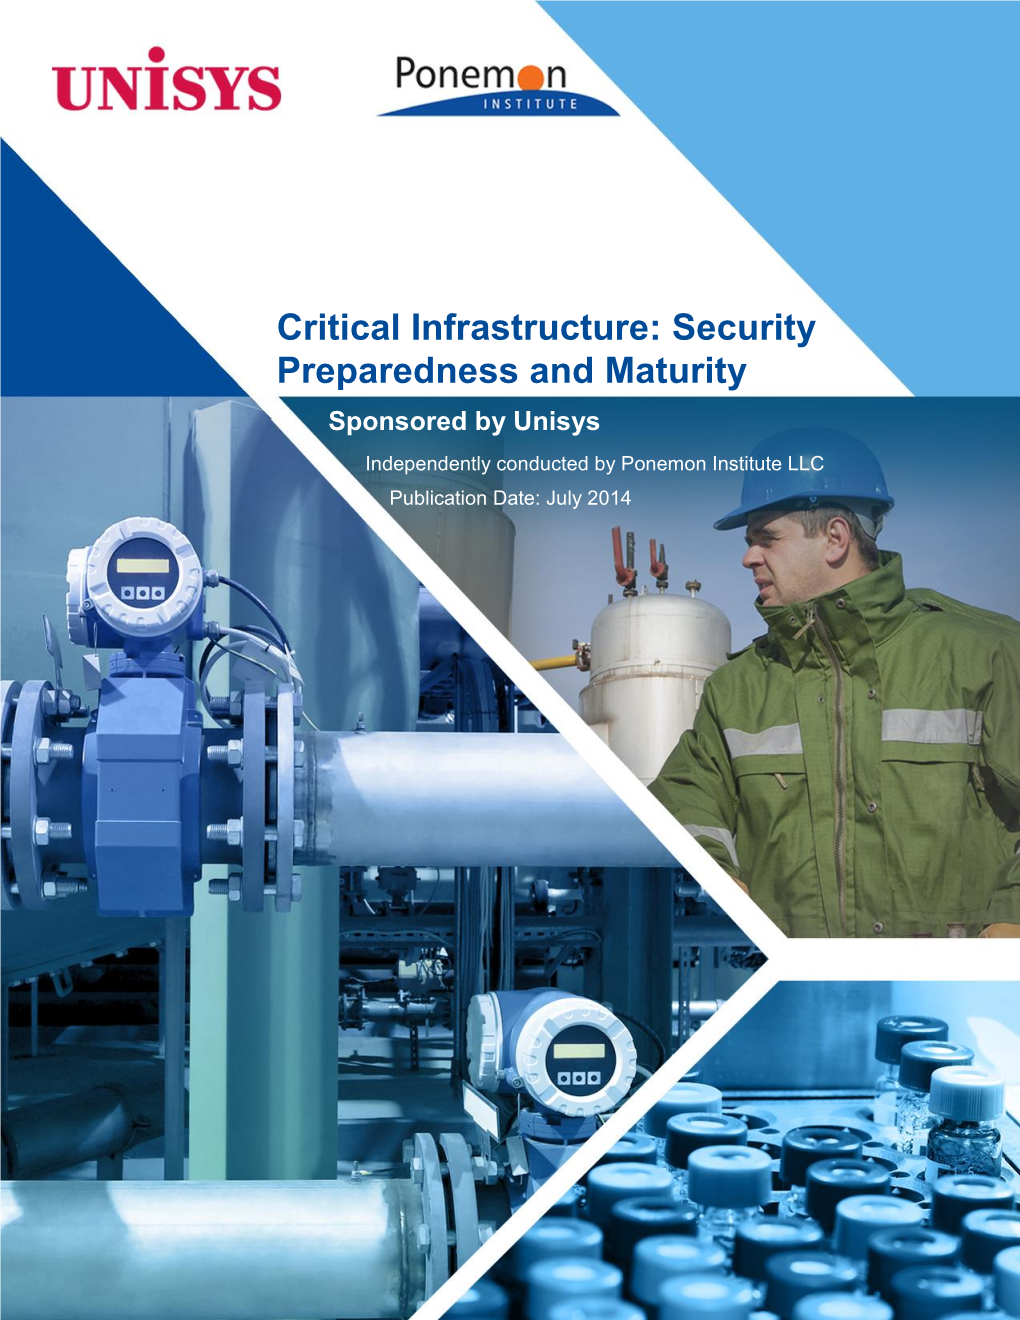 Critical Infrastructure: Security Preparedness and Maturity Sponsored by Unisys Independently Conducted by Ponemon Institute LLC Publication Date: July 2014